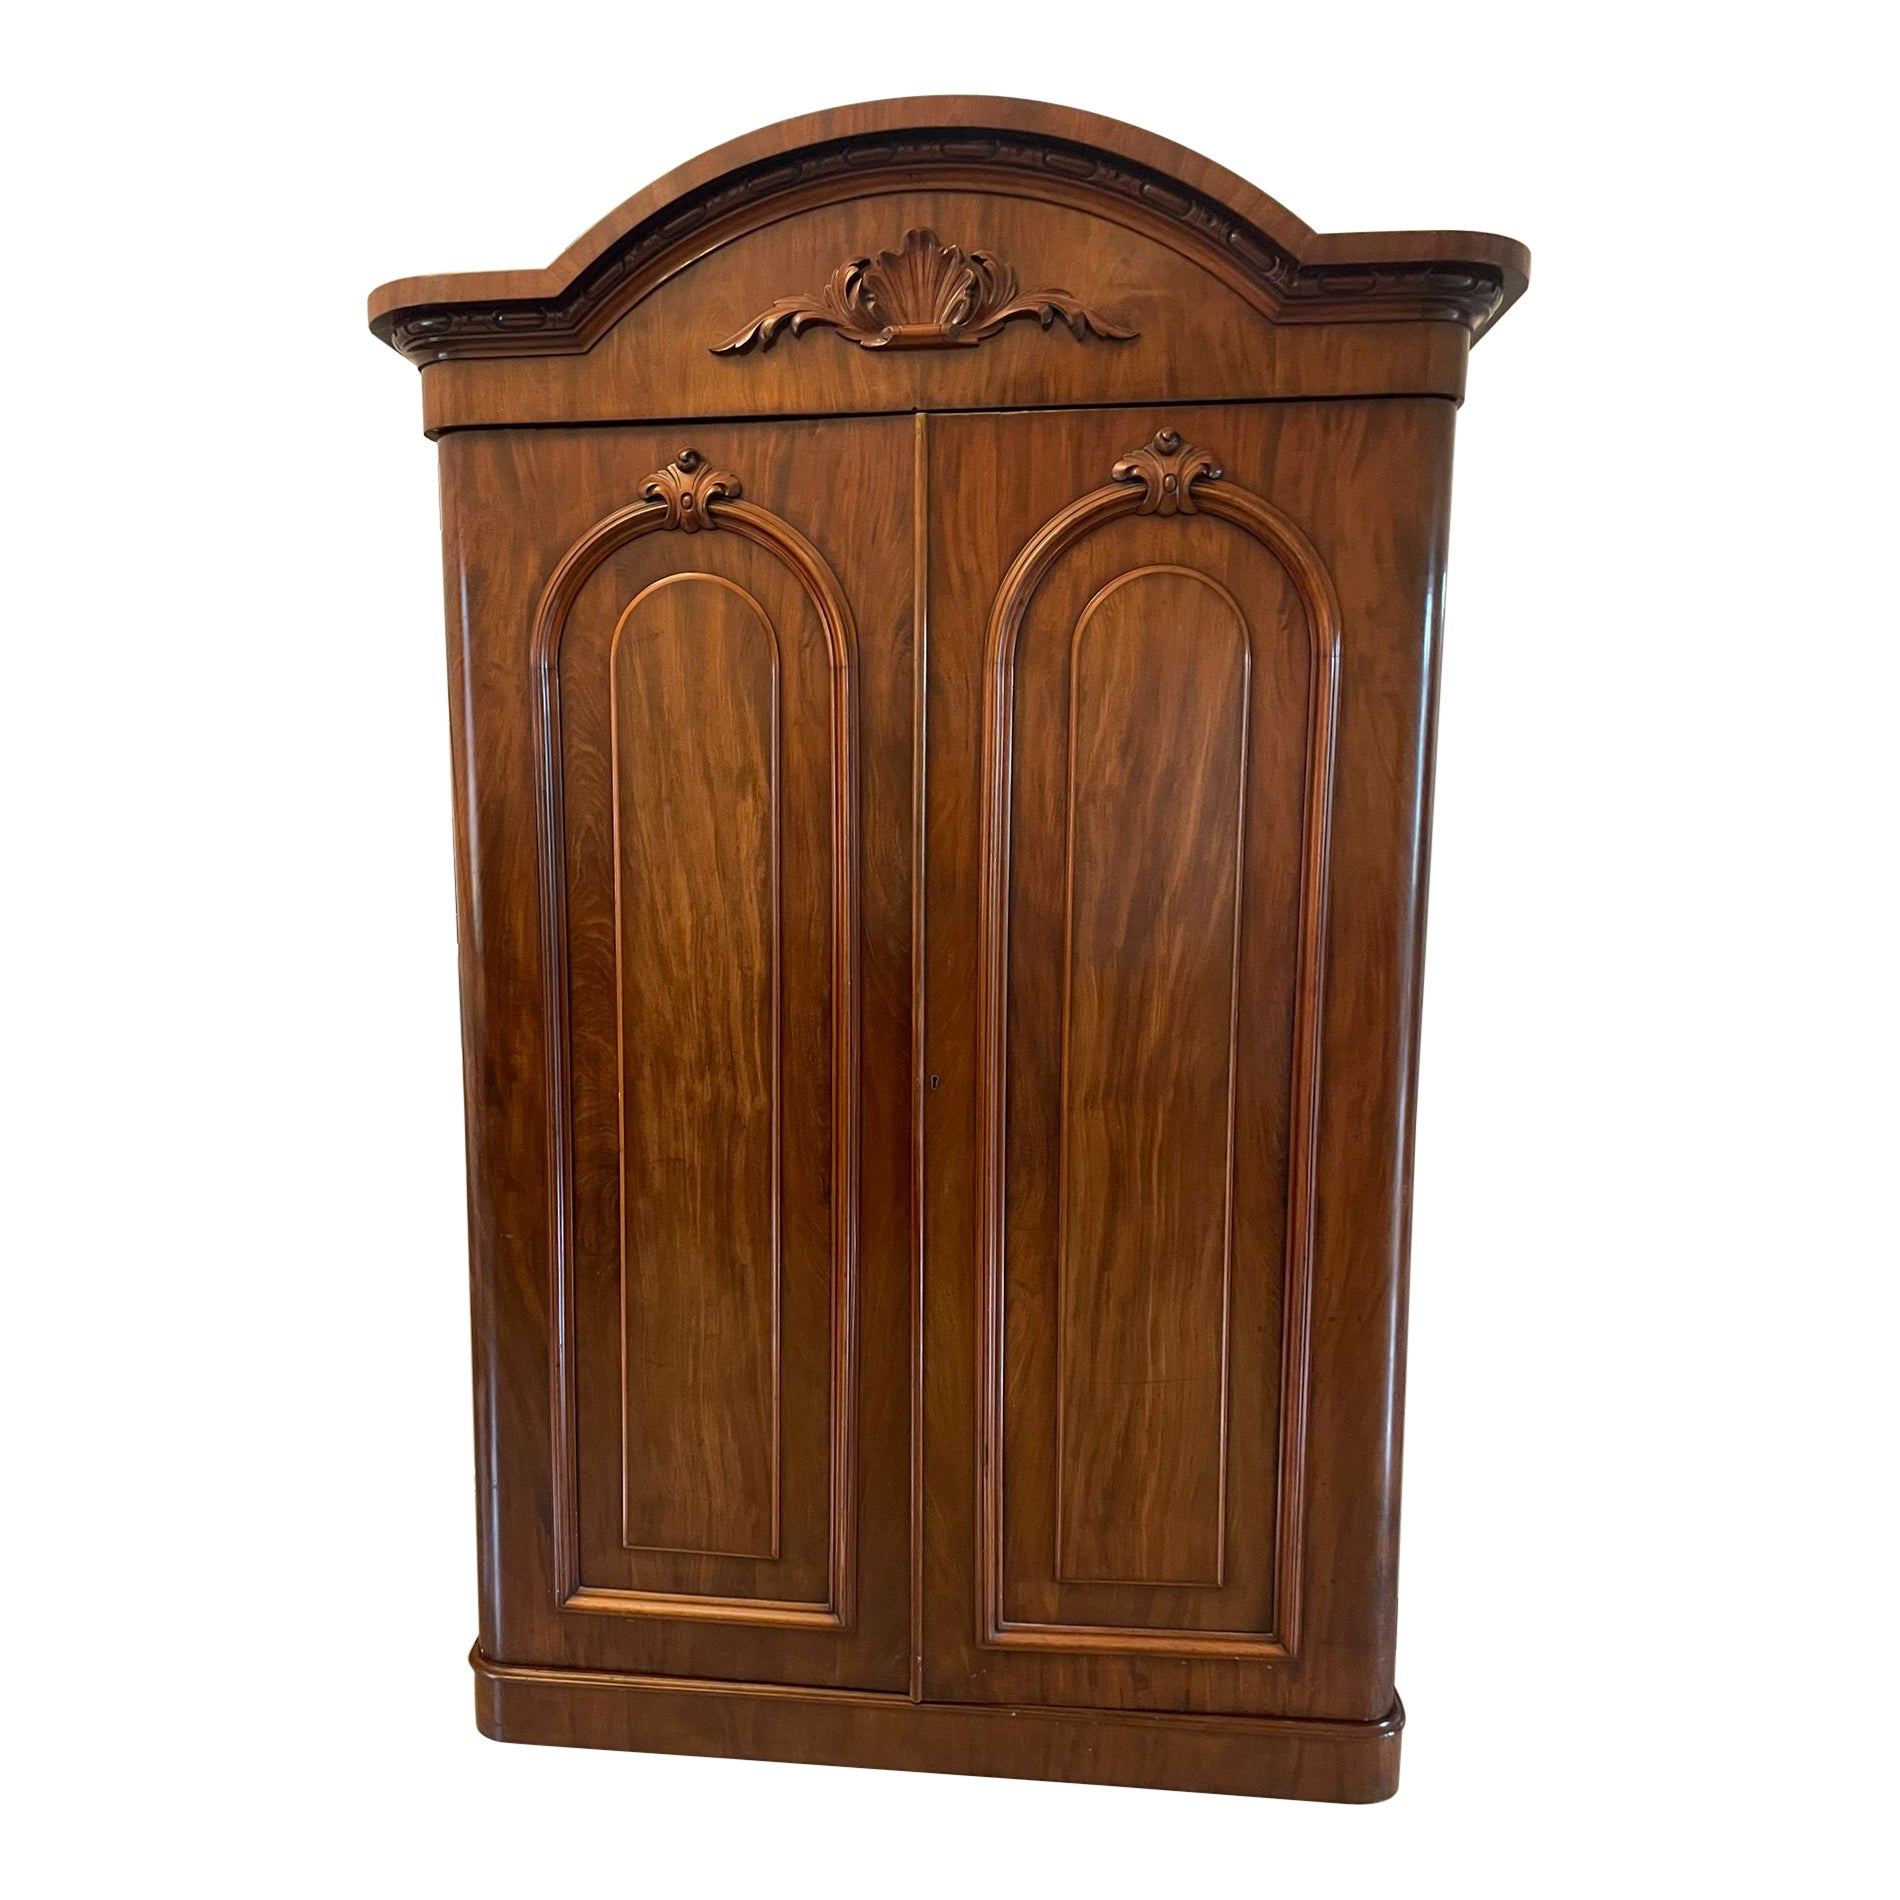 Outstanding Quality Antique Victorian Figured Mahogany Wardrobe 